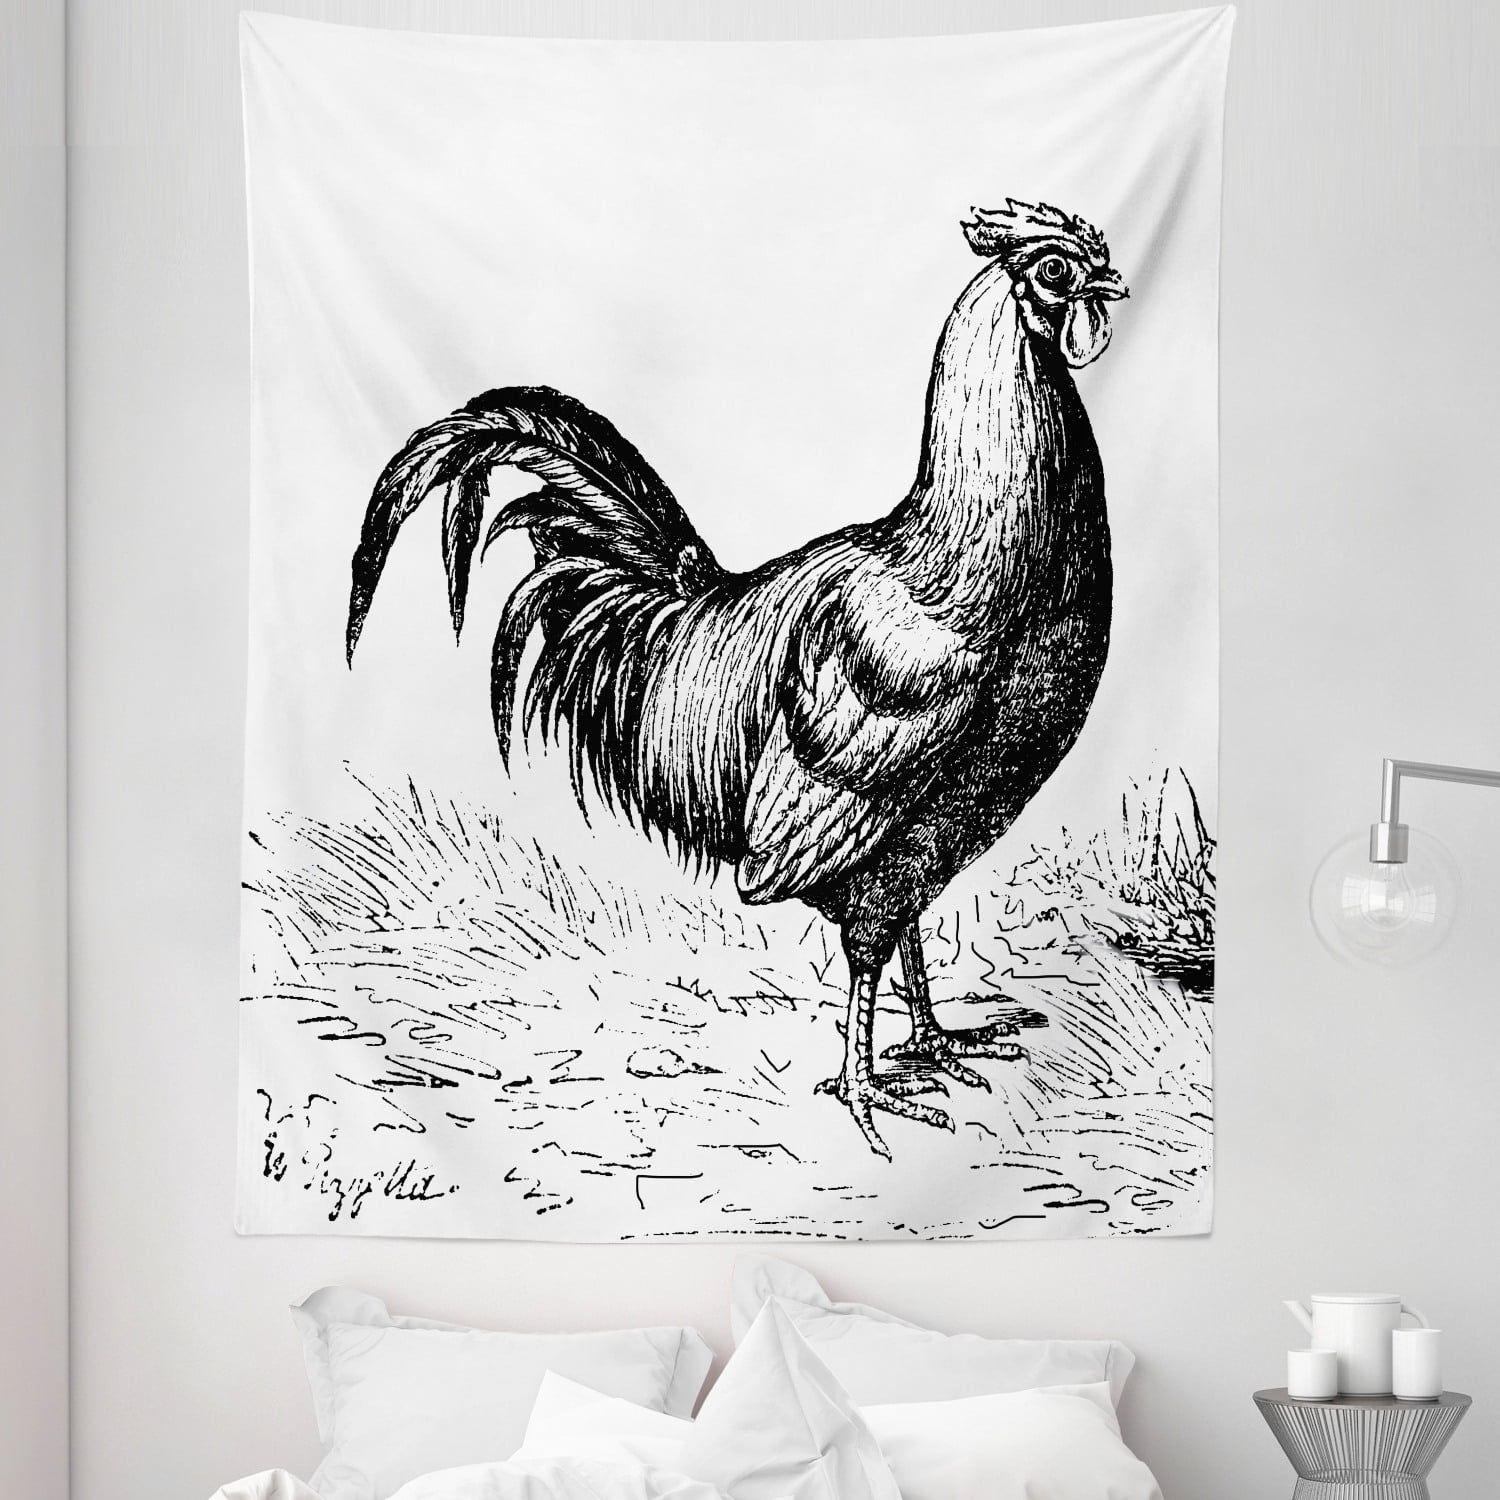 ROOSTER COCKEREL Poster Vintage Chicken Picture Wall Art Print Home Cafe Decor